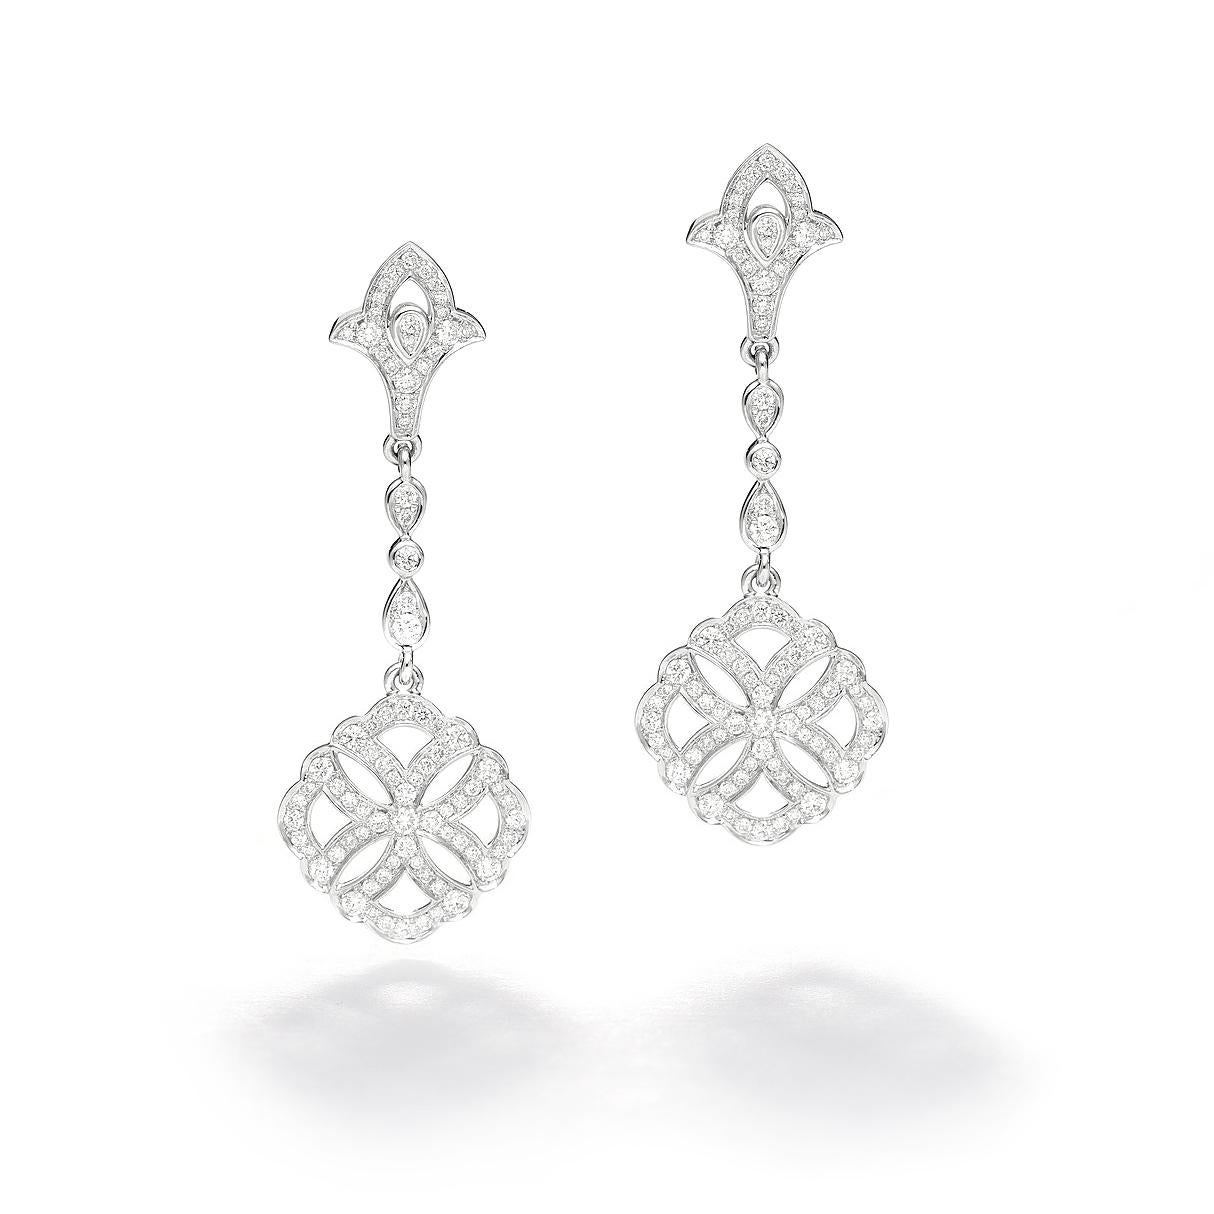 Earrings in 18kt white gold set with 168 diamonds 1.43 cts